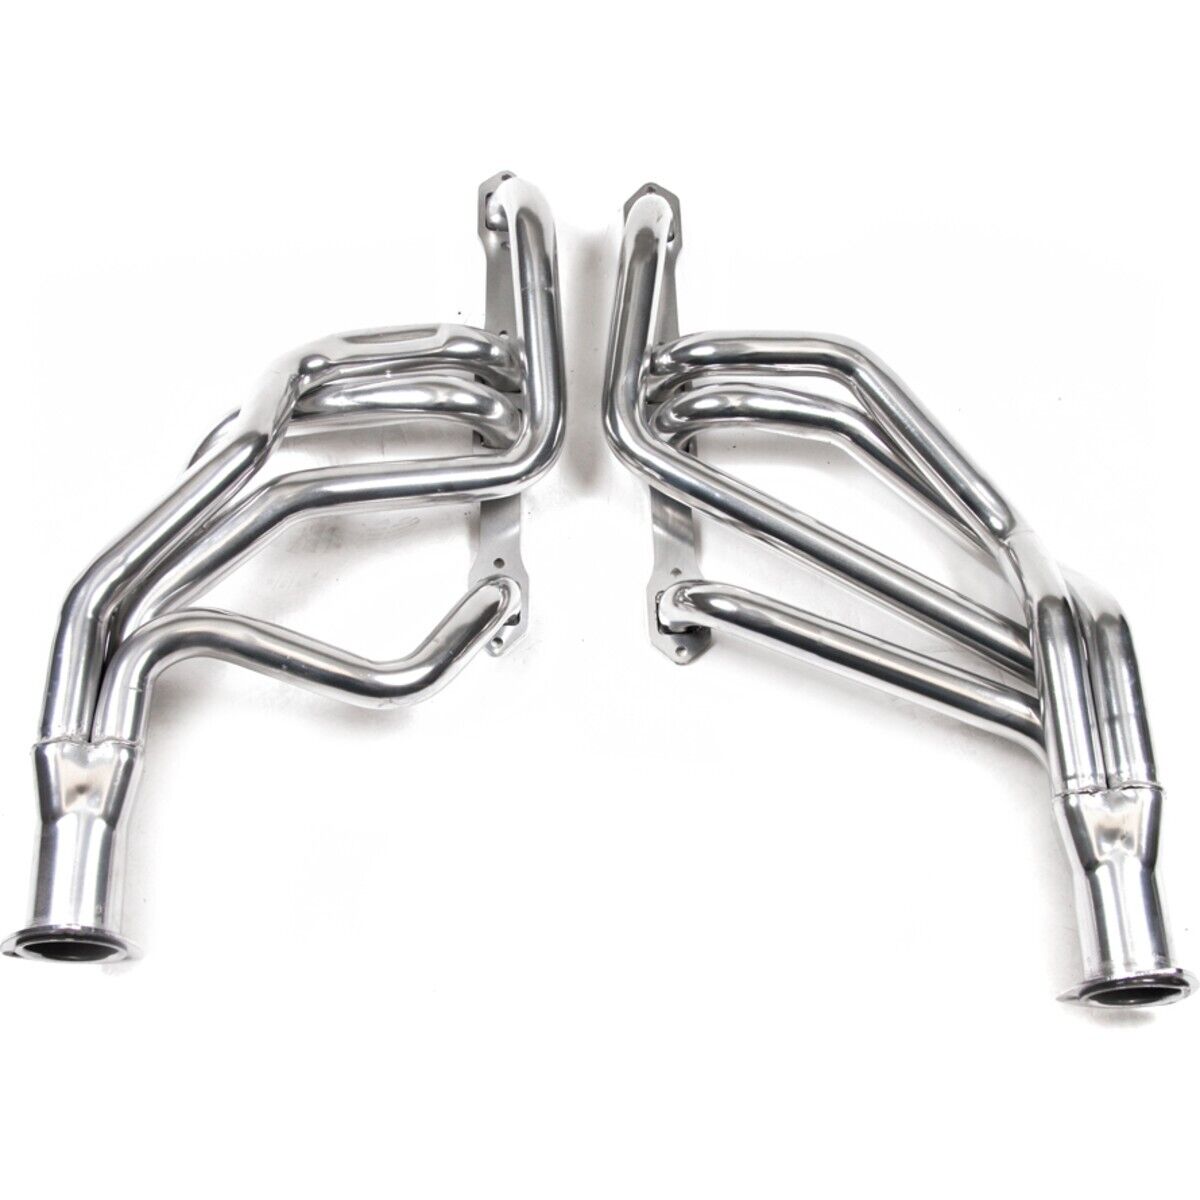 33130FLT Flowtech Headers Set of 2 for Dodge Charger Challenger Satellite Pair